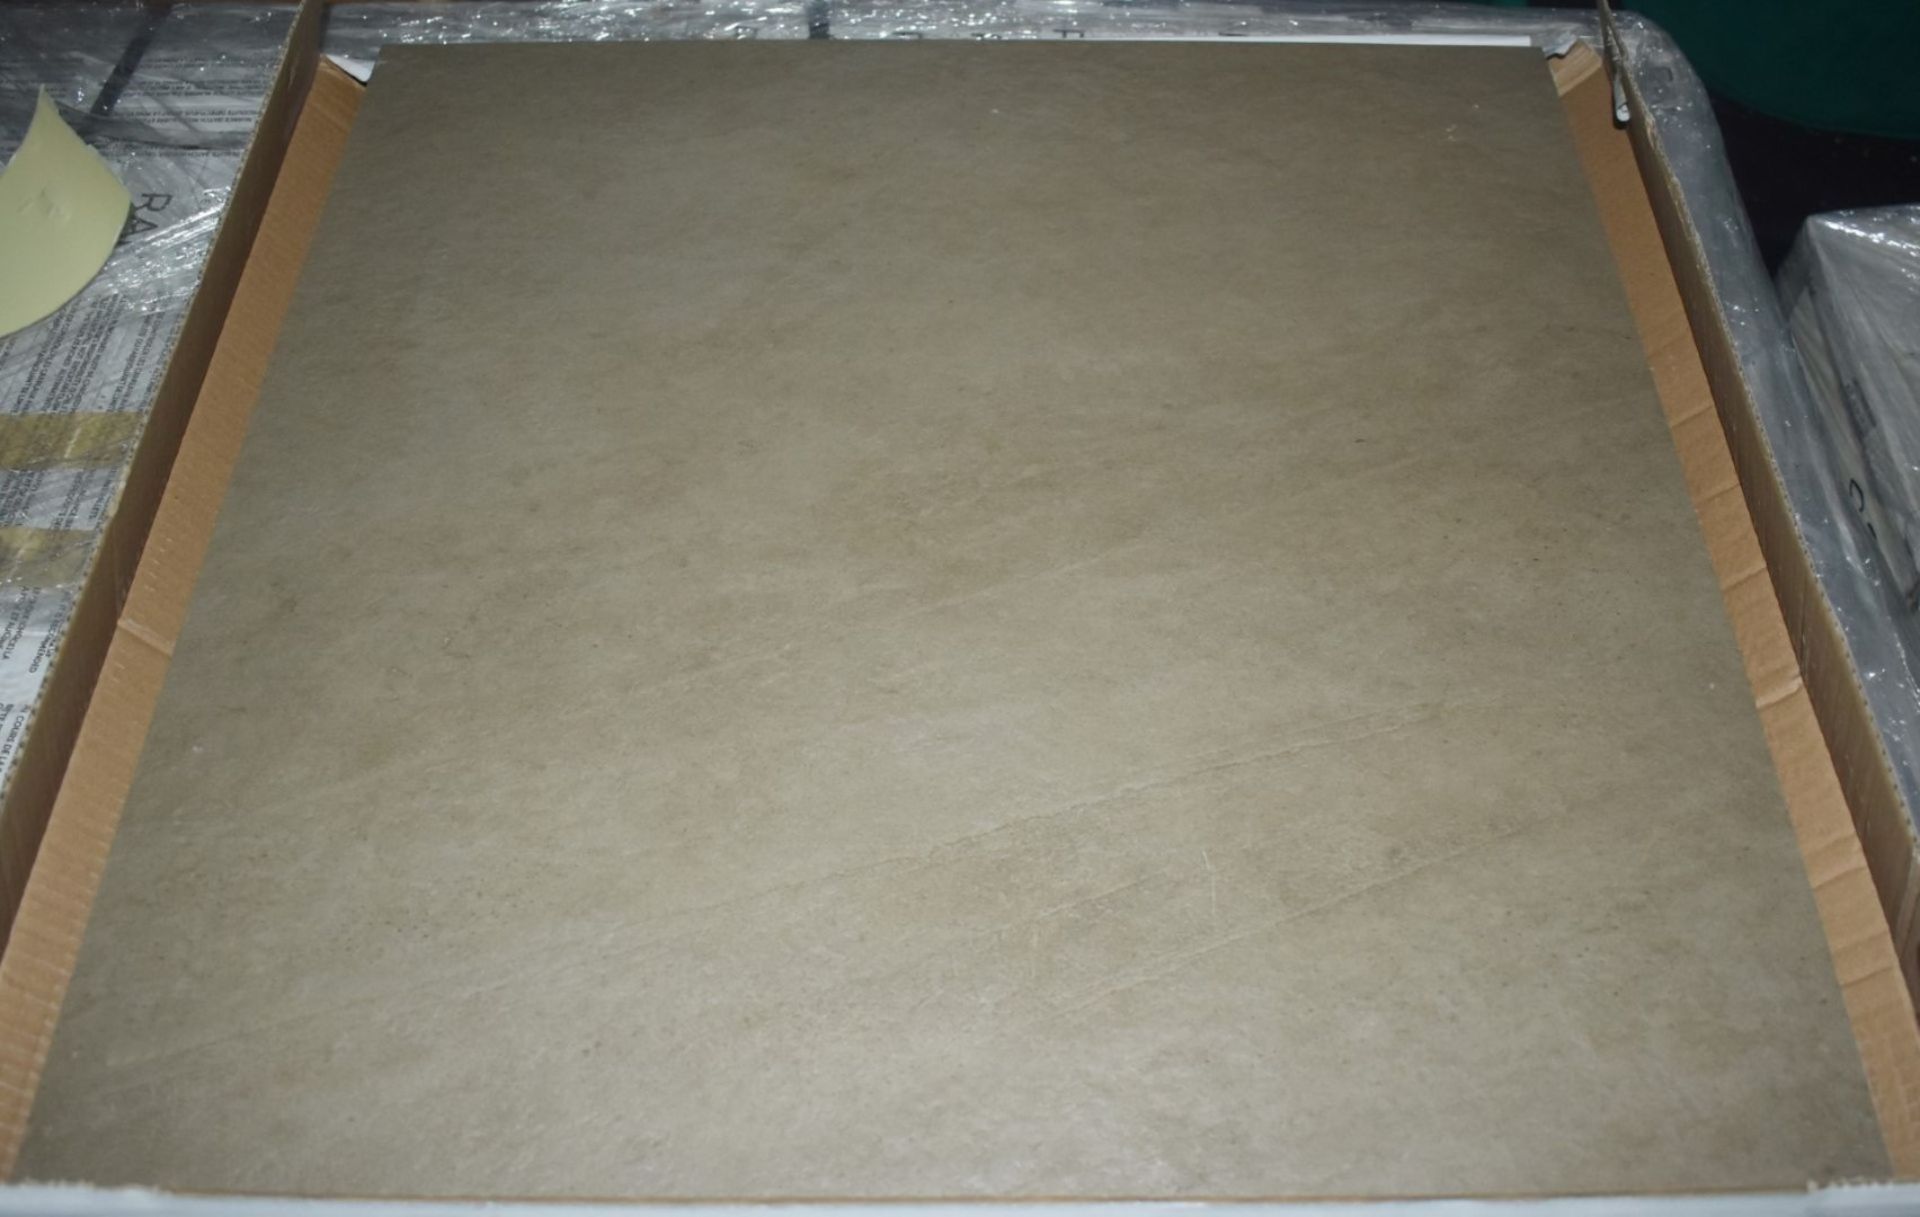 12 x Boxes of RAK Porcelain Floor or Wall Tiles - Concrete Design in Clay Brown - 60 x 60 cm Tiles - Image 6 of 7